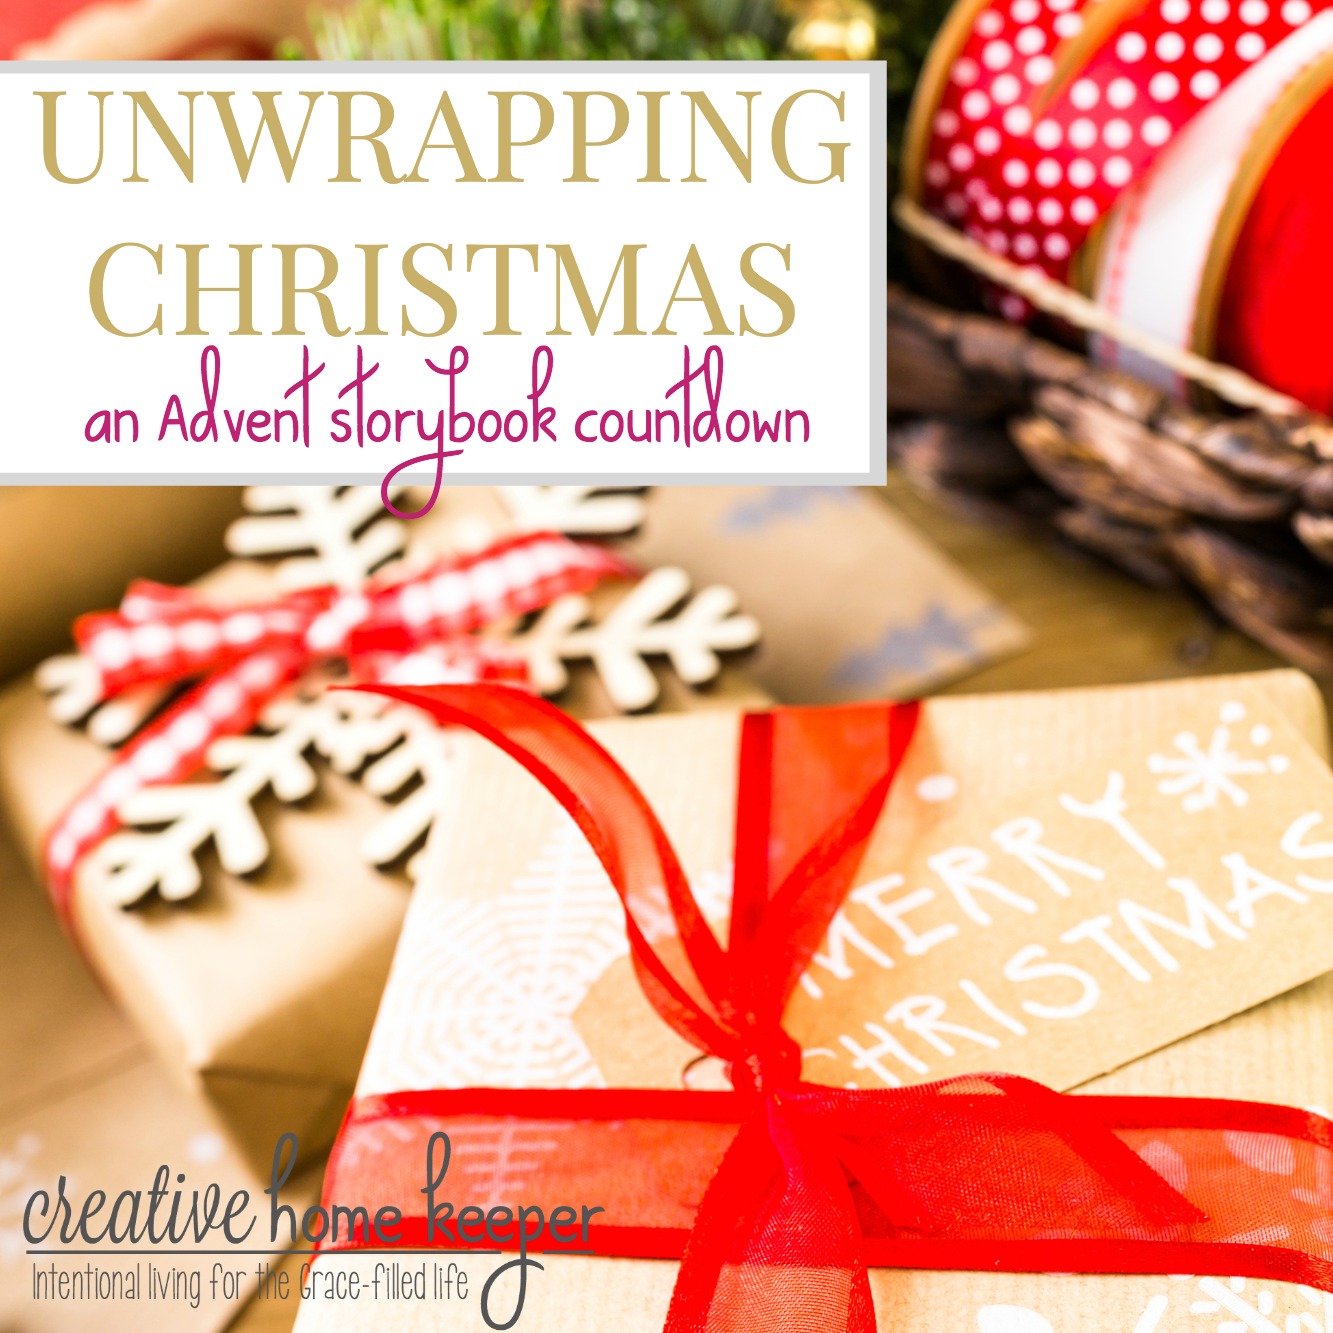 Unwrapping Christmas: An Advent Storybook Countdown